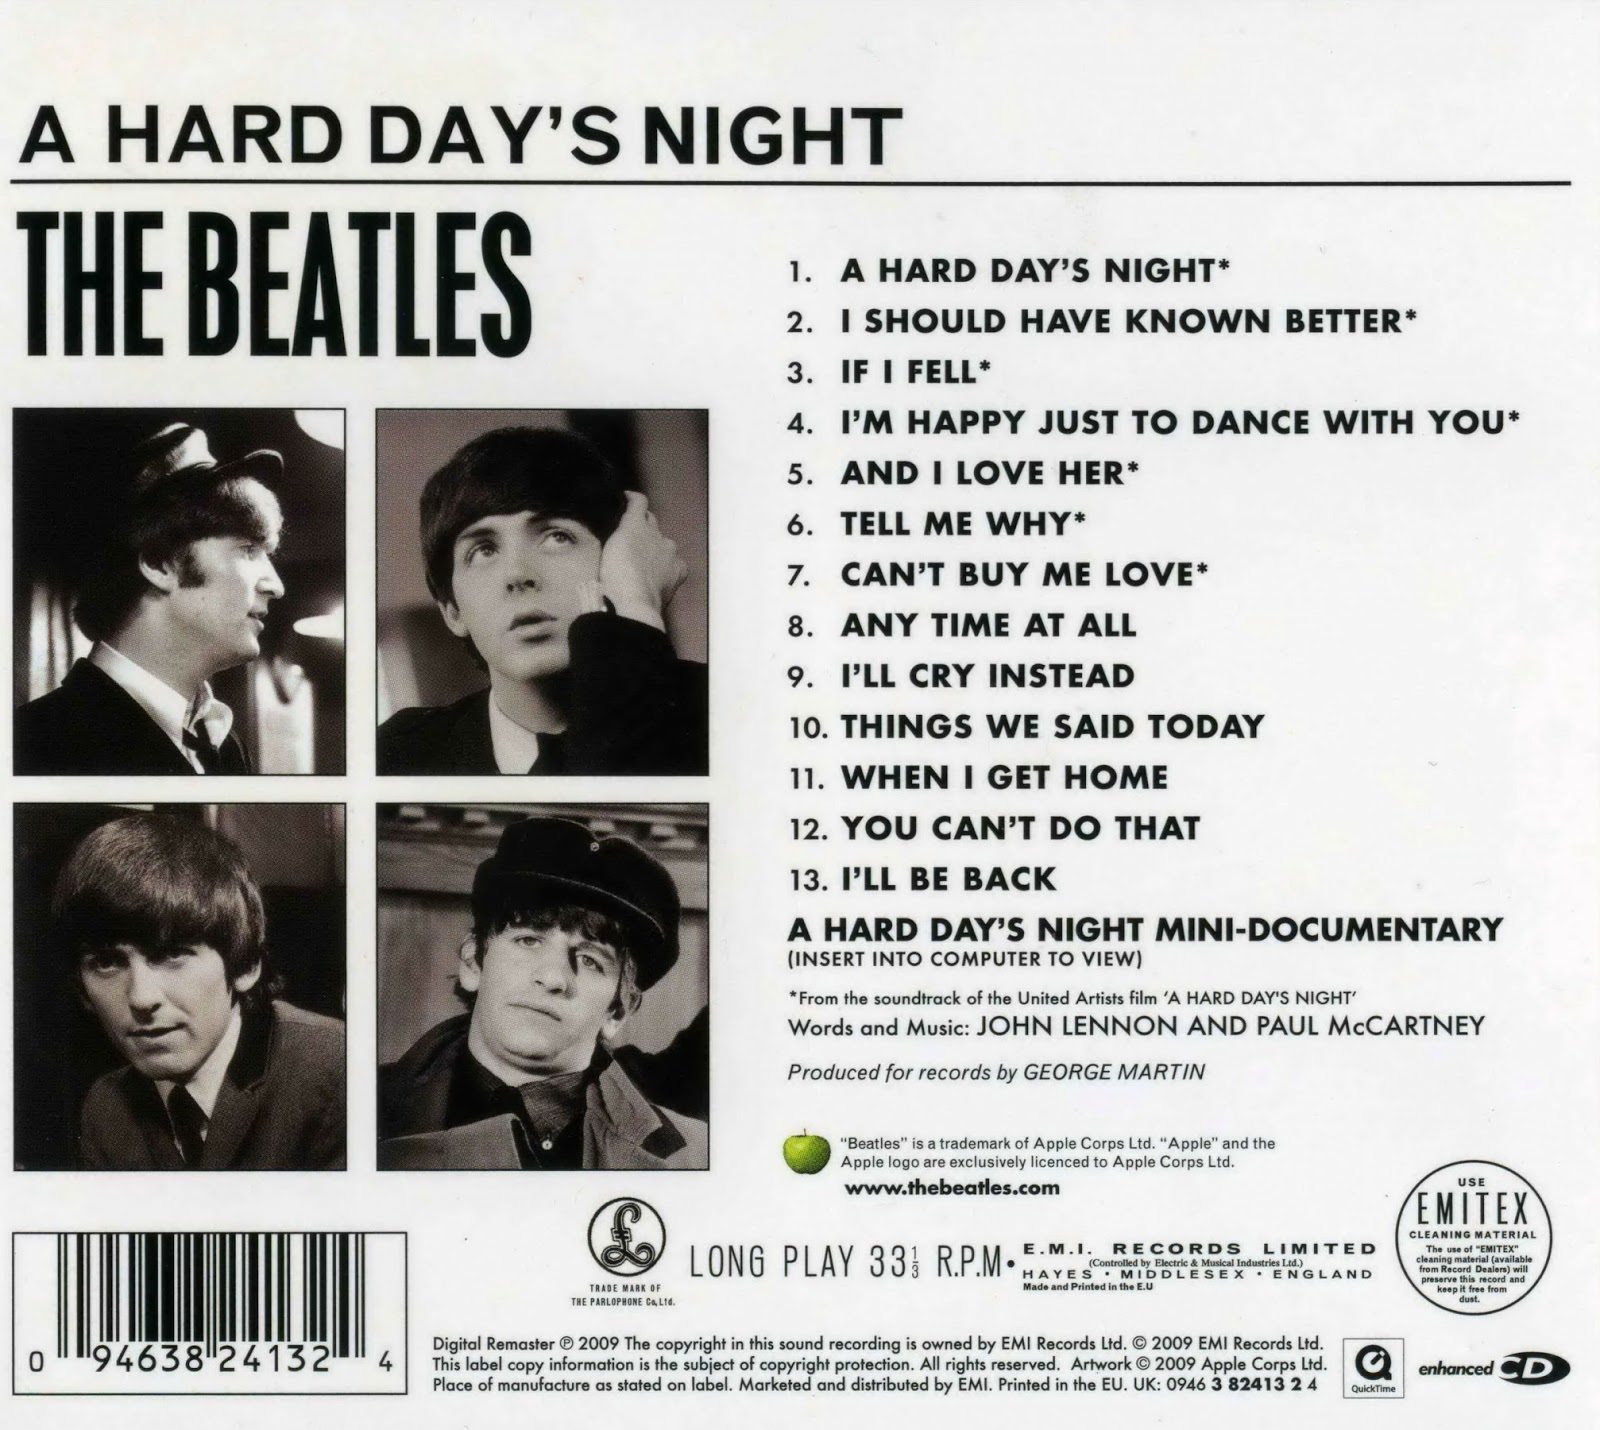 The beatles a hard day s night. The Beatles a hard Day's Night 1964. The Beatles a hard Day's Night альбом. Битлз 1964 альбом. The Beatles a hard Day's Night 1964 альбом.